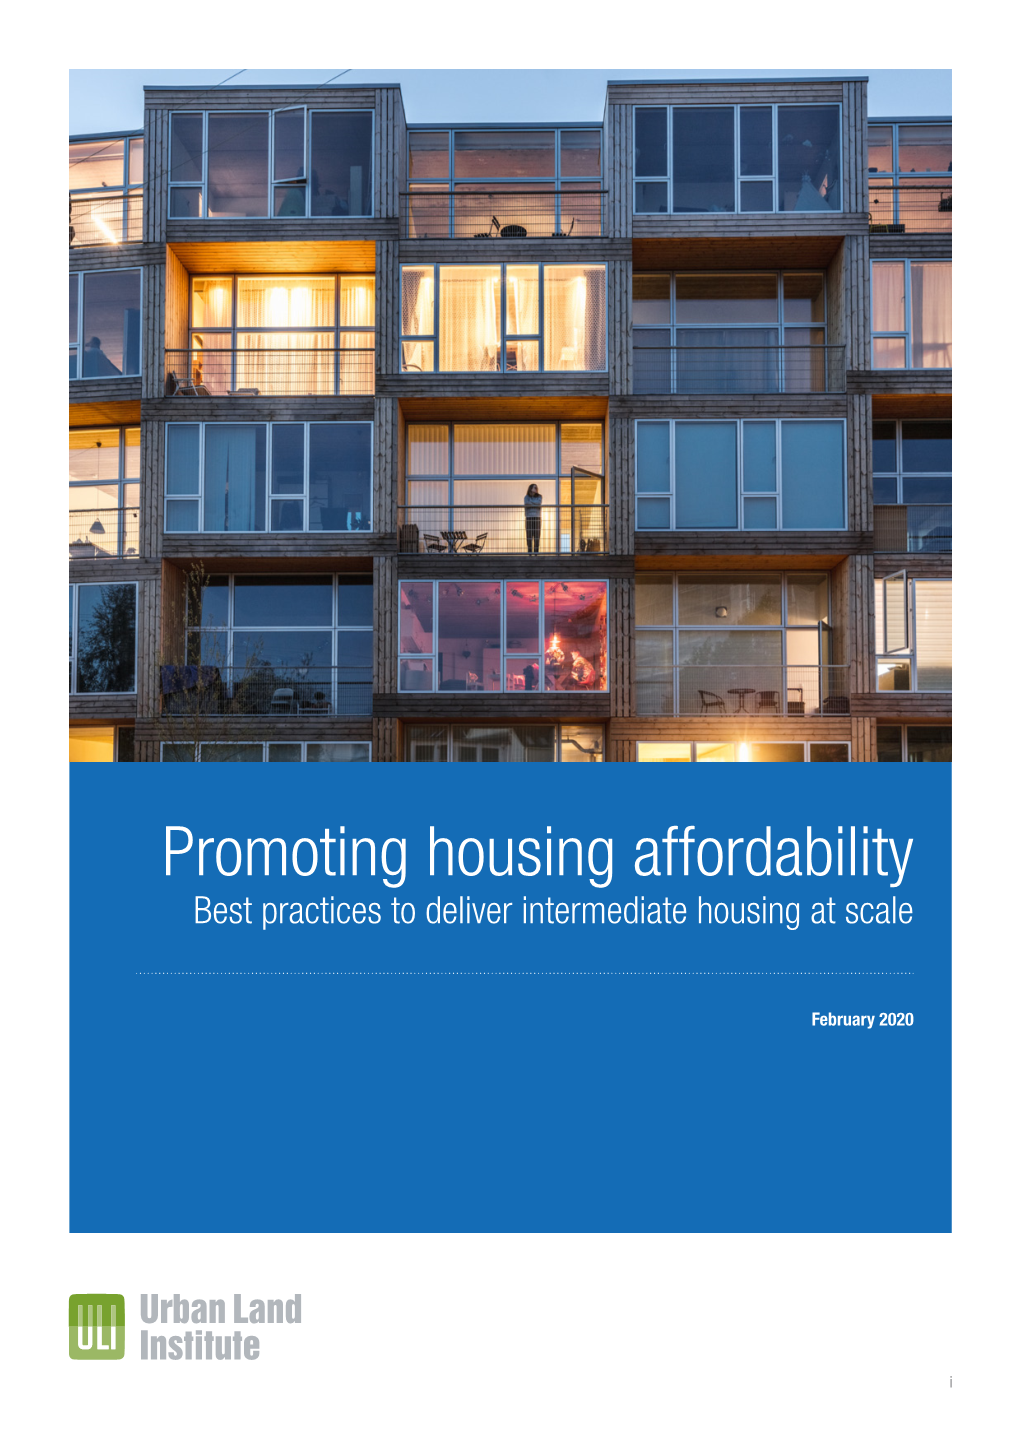 Promoting Housing Affordability Best Practices to Deliver Intermediate Housing at Scale